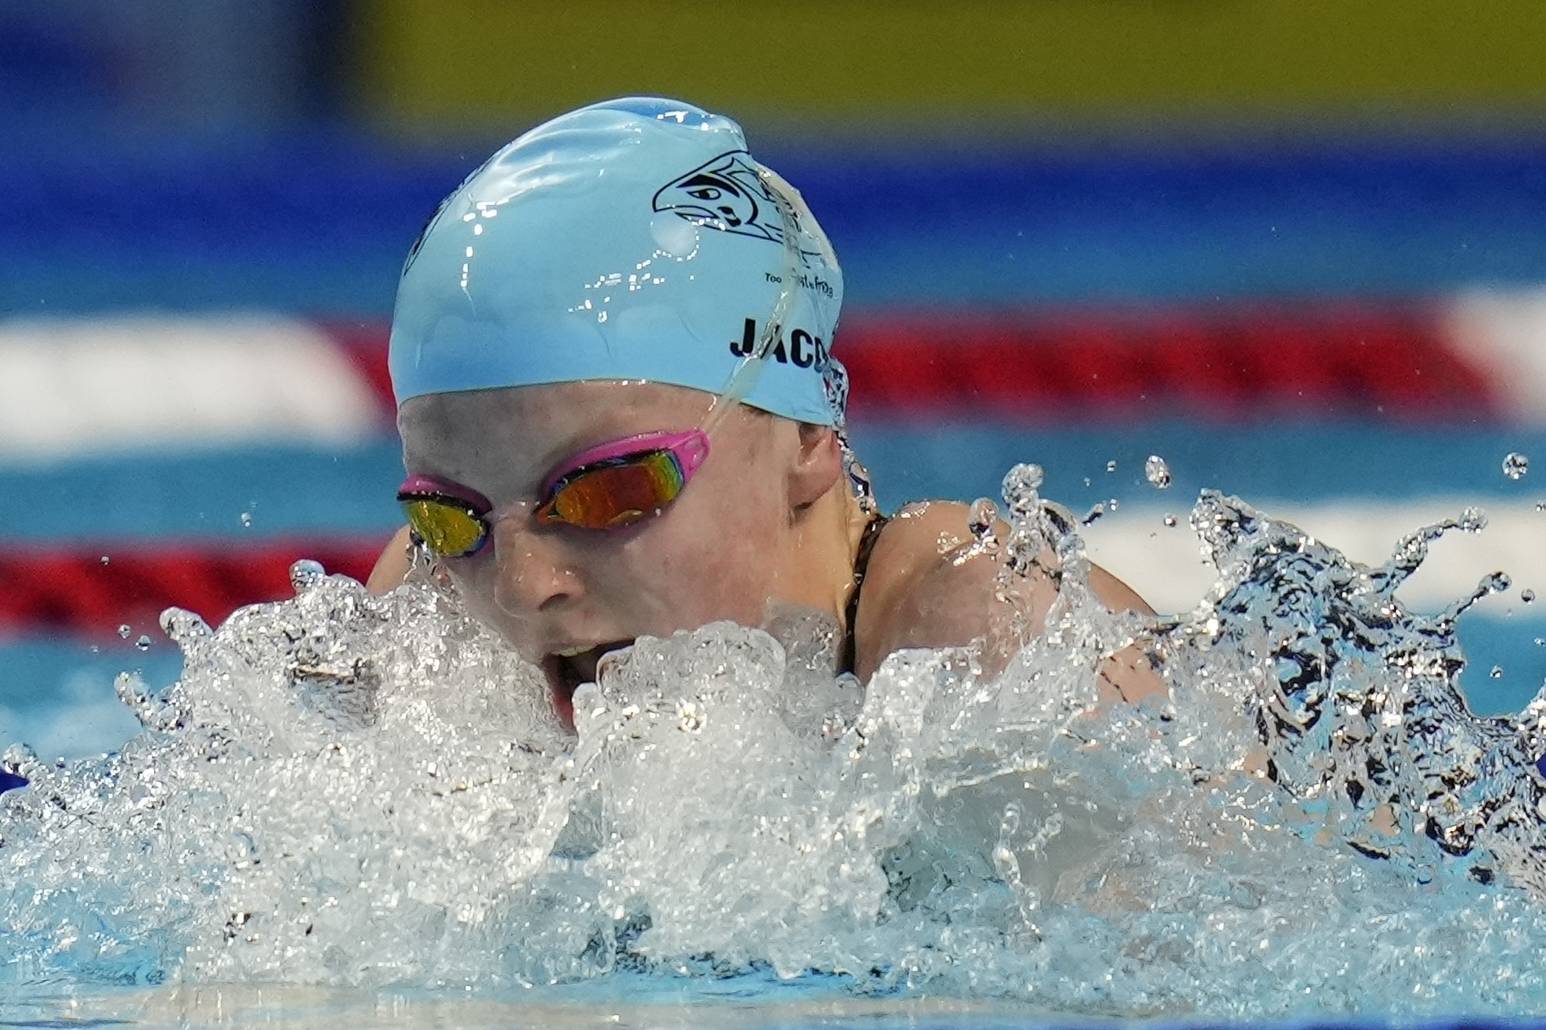 Lydia Jacoby participates in the Women’s 100 Breaststroke during wave 2 of the U.S. Olympic Swim Trials on Monday, June 14, 2021, in Omaha, Neb. (AP Photo/Jeff Roberson)